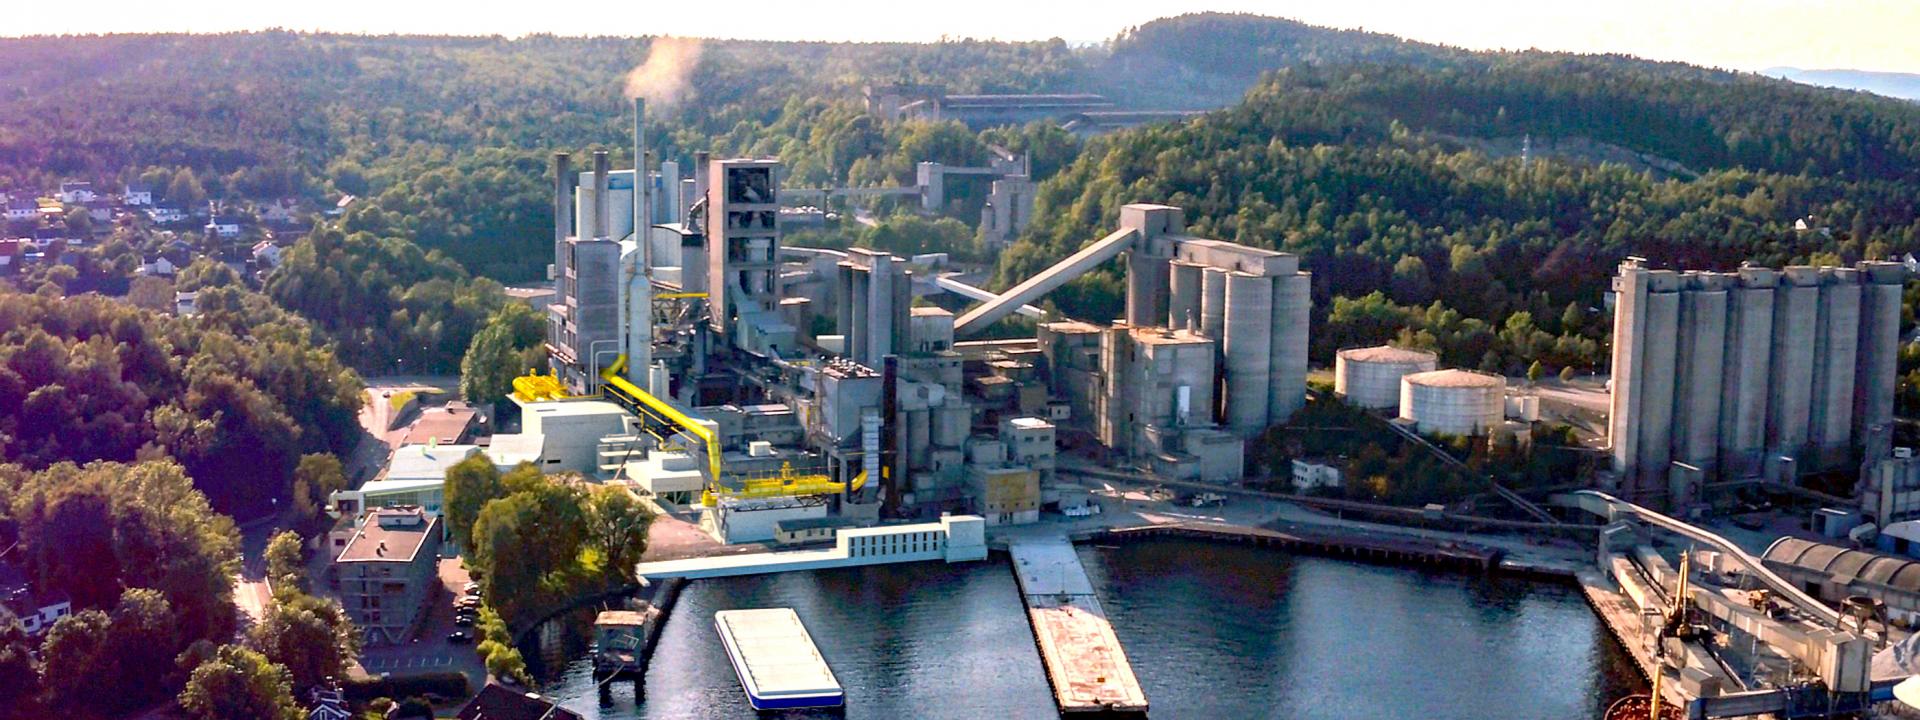  The Brevik carbon capture project is due for completion in 2024